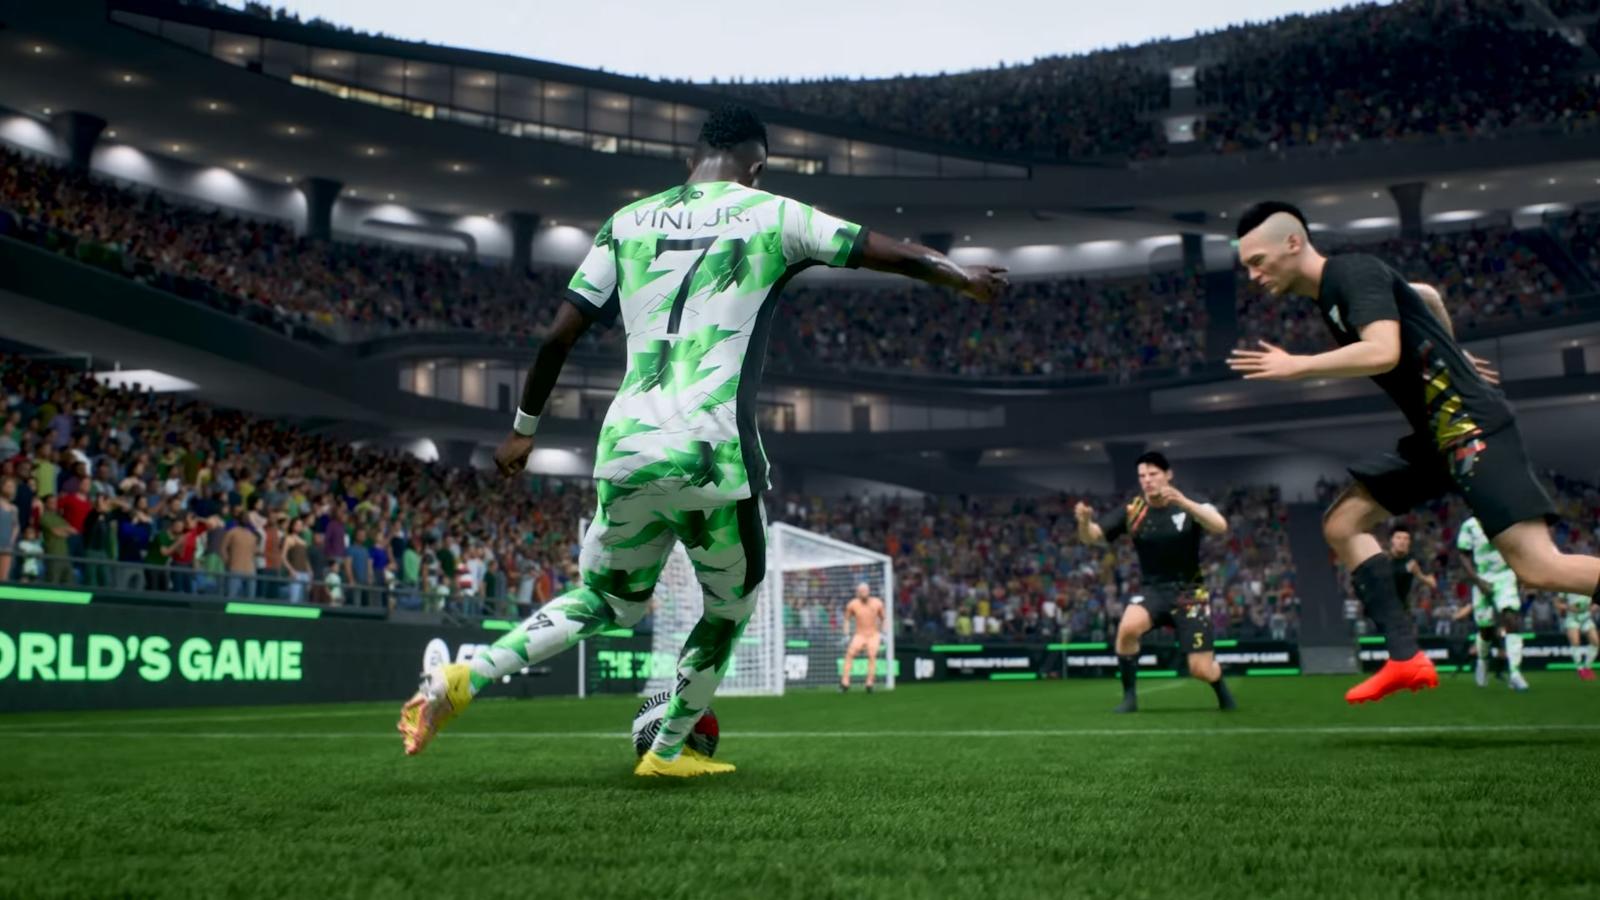 Vinicius Jr. cutting inside on the wing in EA FC 24 Ultimate Team trailer.